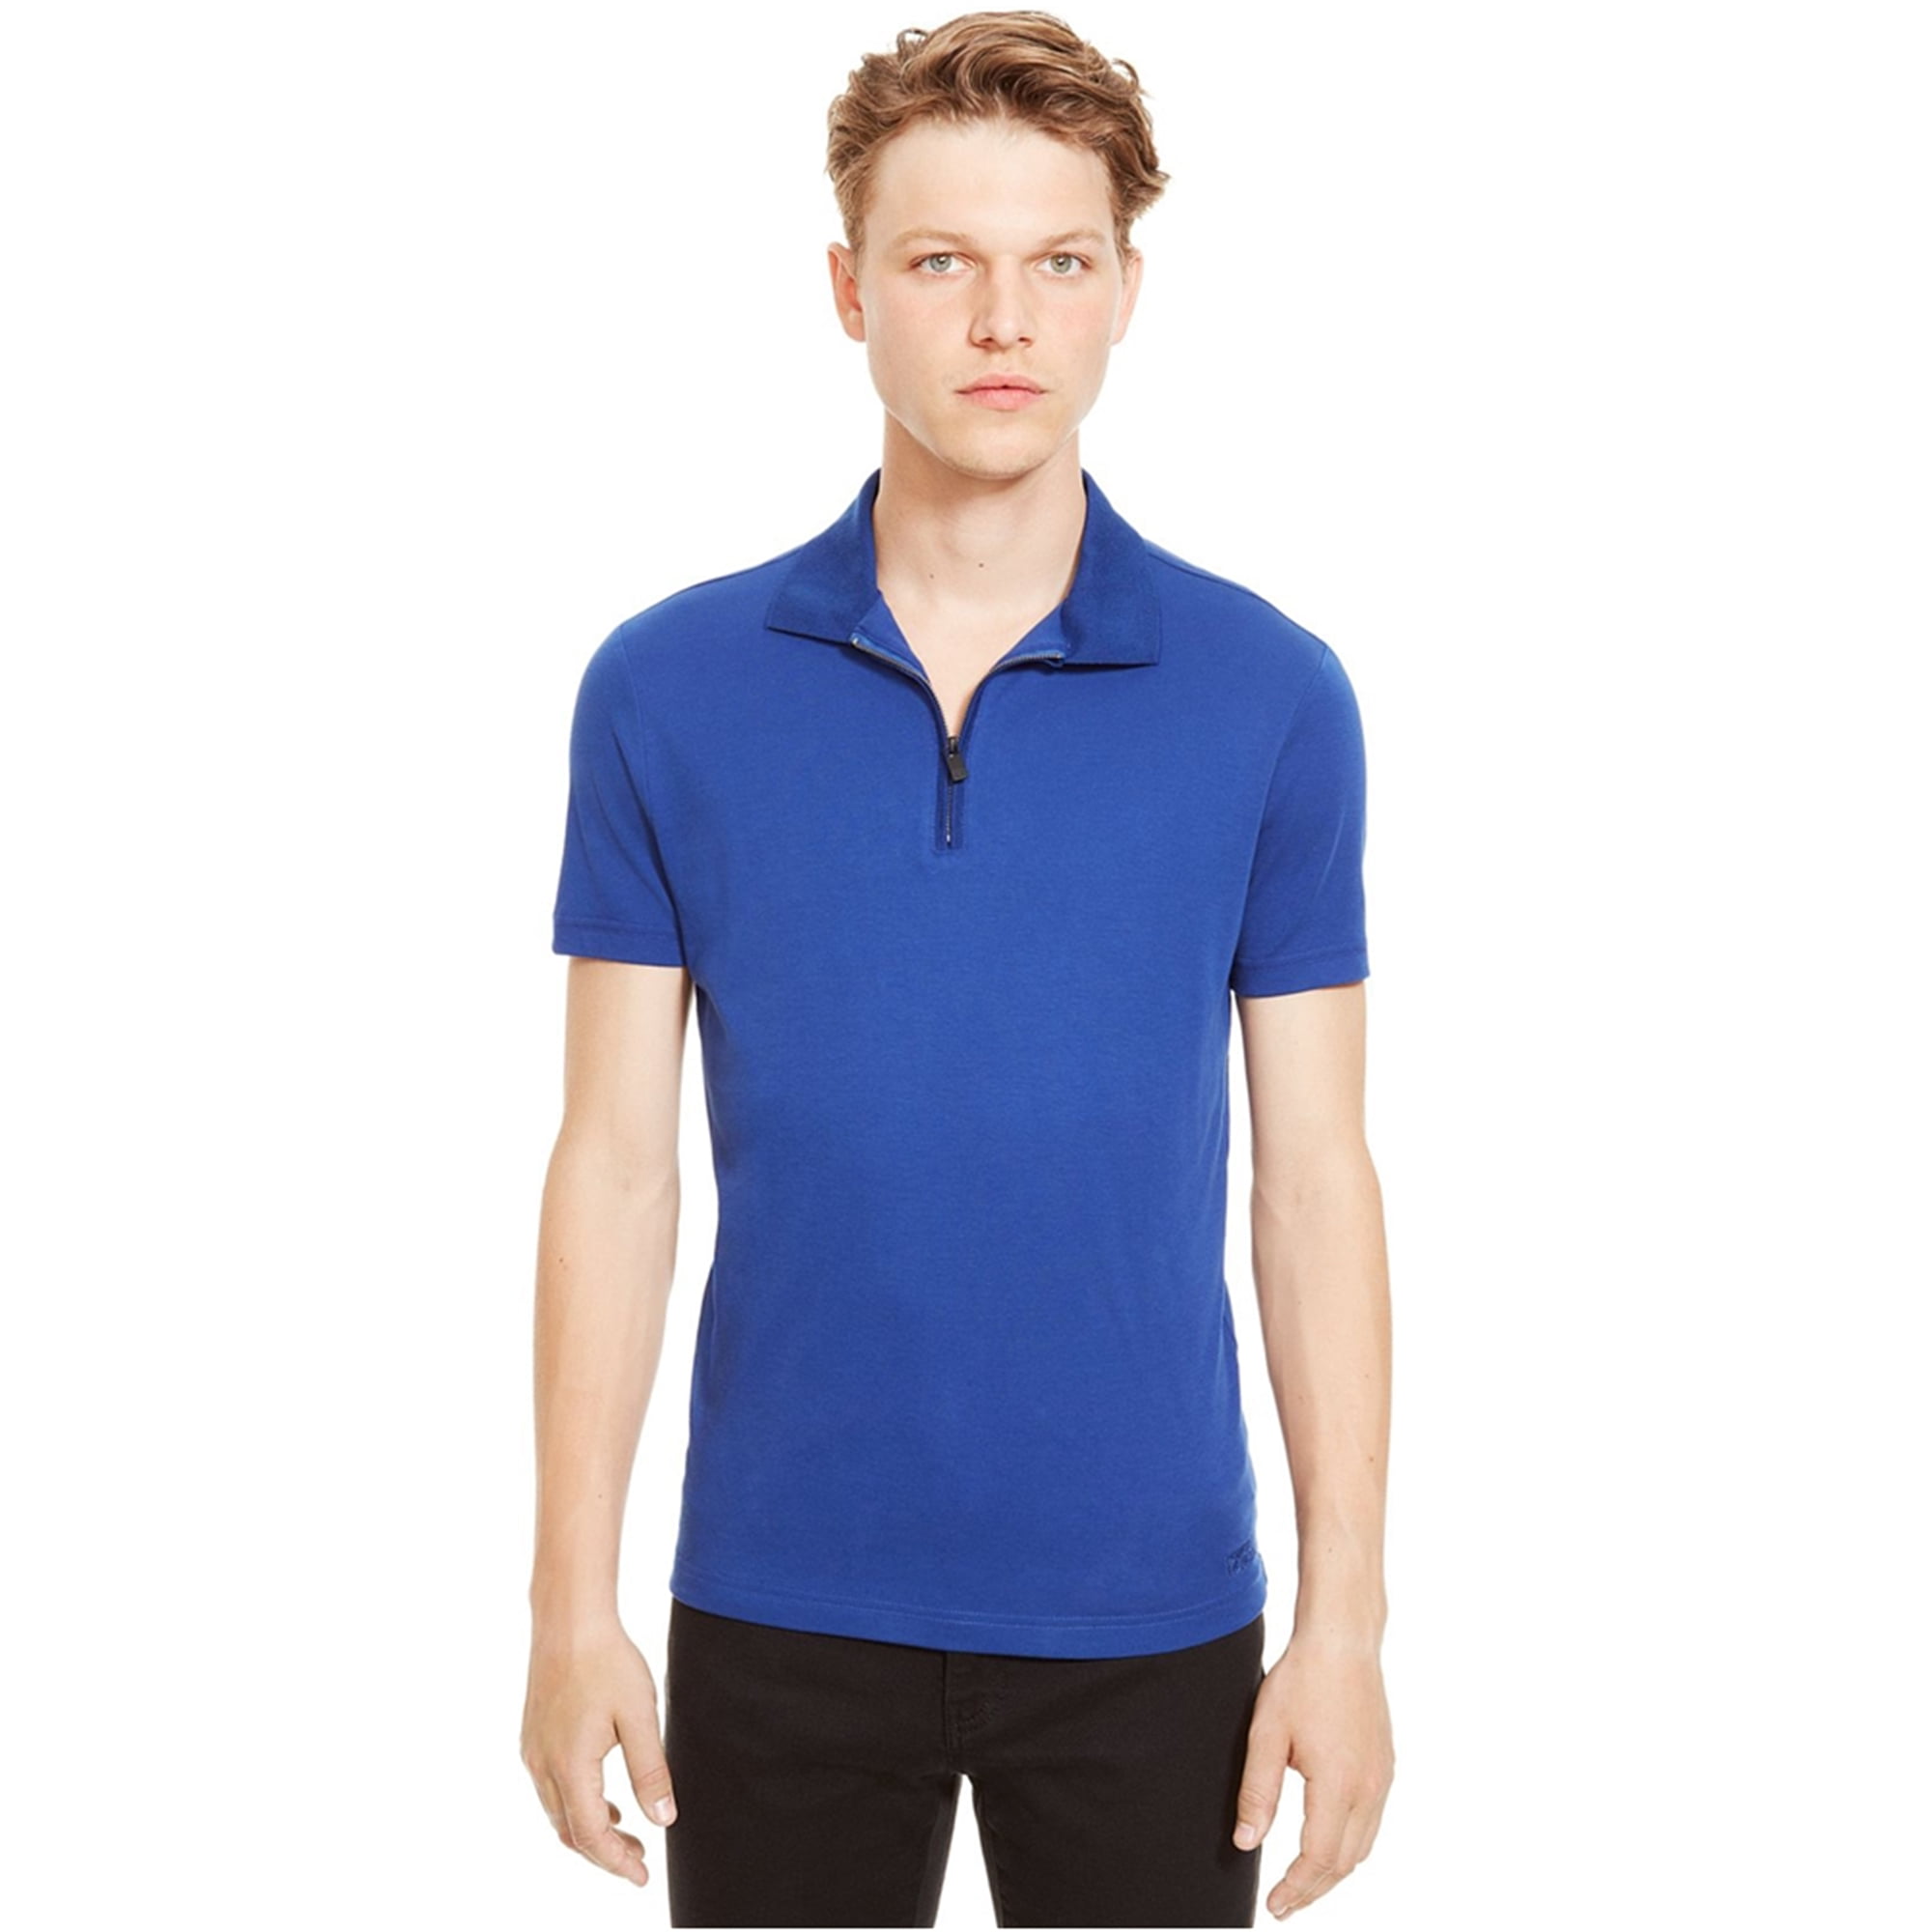 Kenneth Cole - Kenneth Cole Mens 1/4 Zip Rugby Polo Shirt, Blue, XX ...